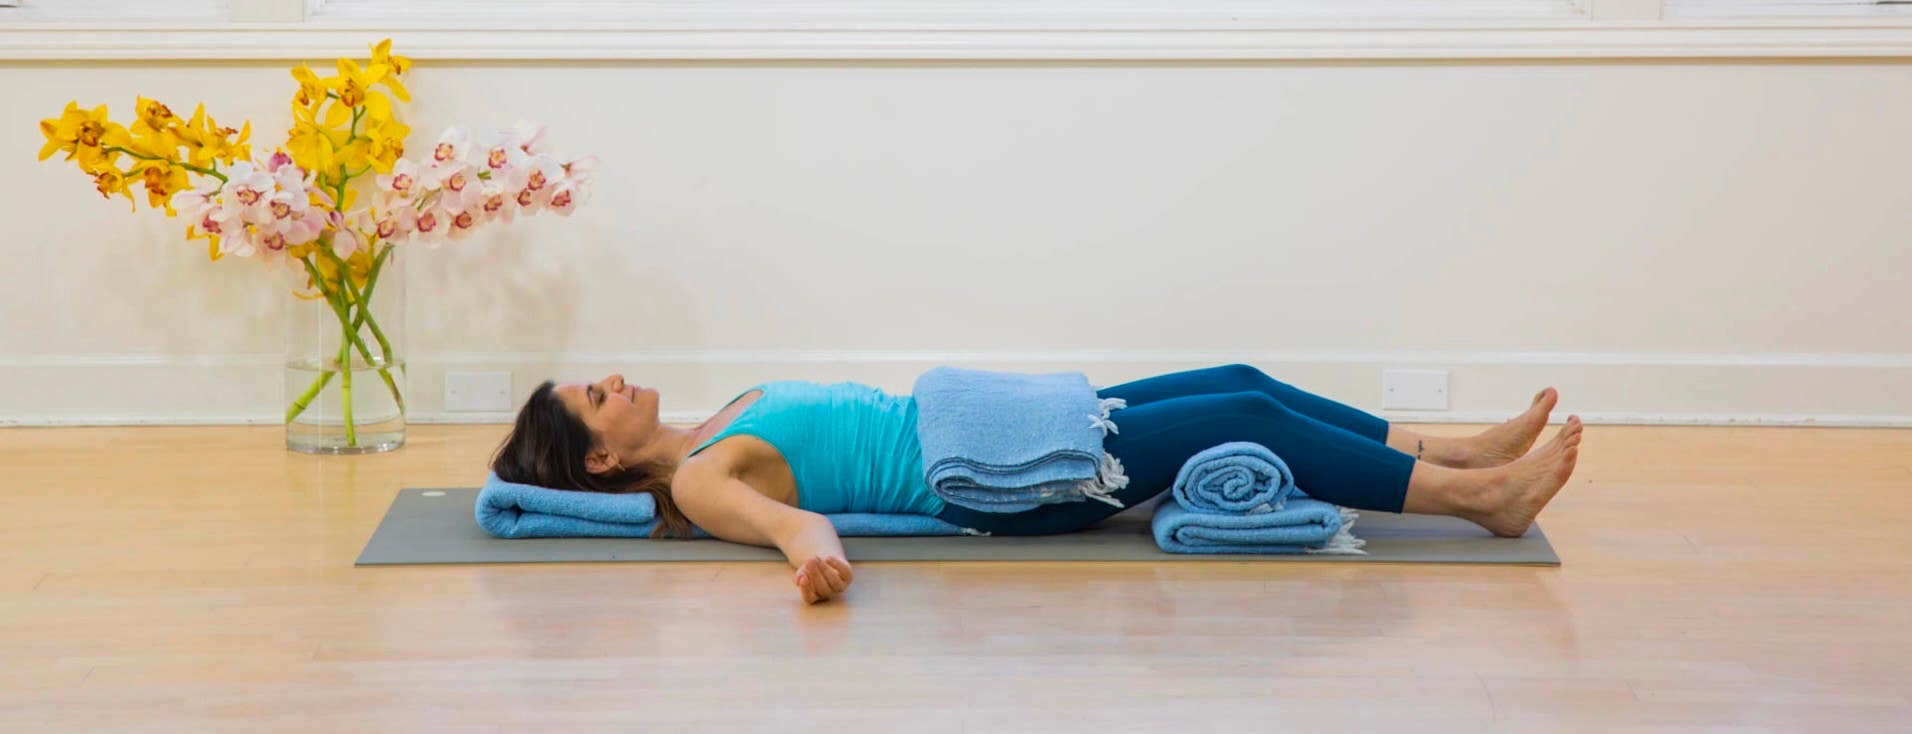 Ojas Yoga and Wellness - Suffering from frequent headaches or migraines?  Try out these poses which helps to bring blood circulation to head region  releasing headaches and give relief. #Ojasyoga #Yoga #Migraine |